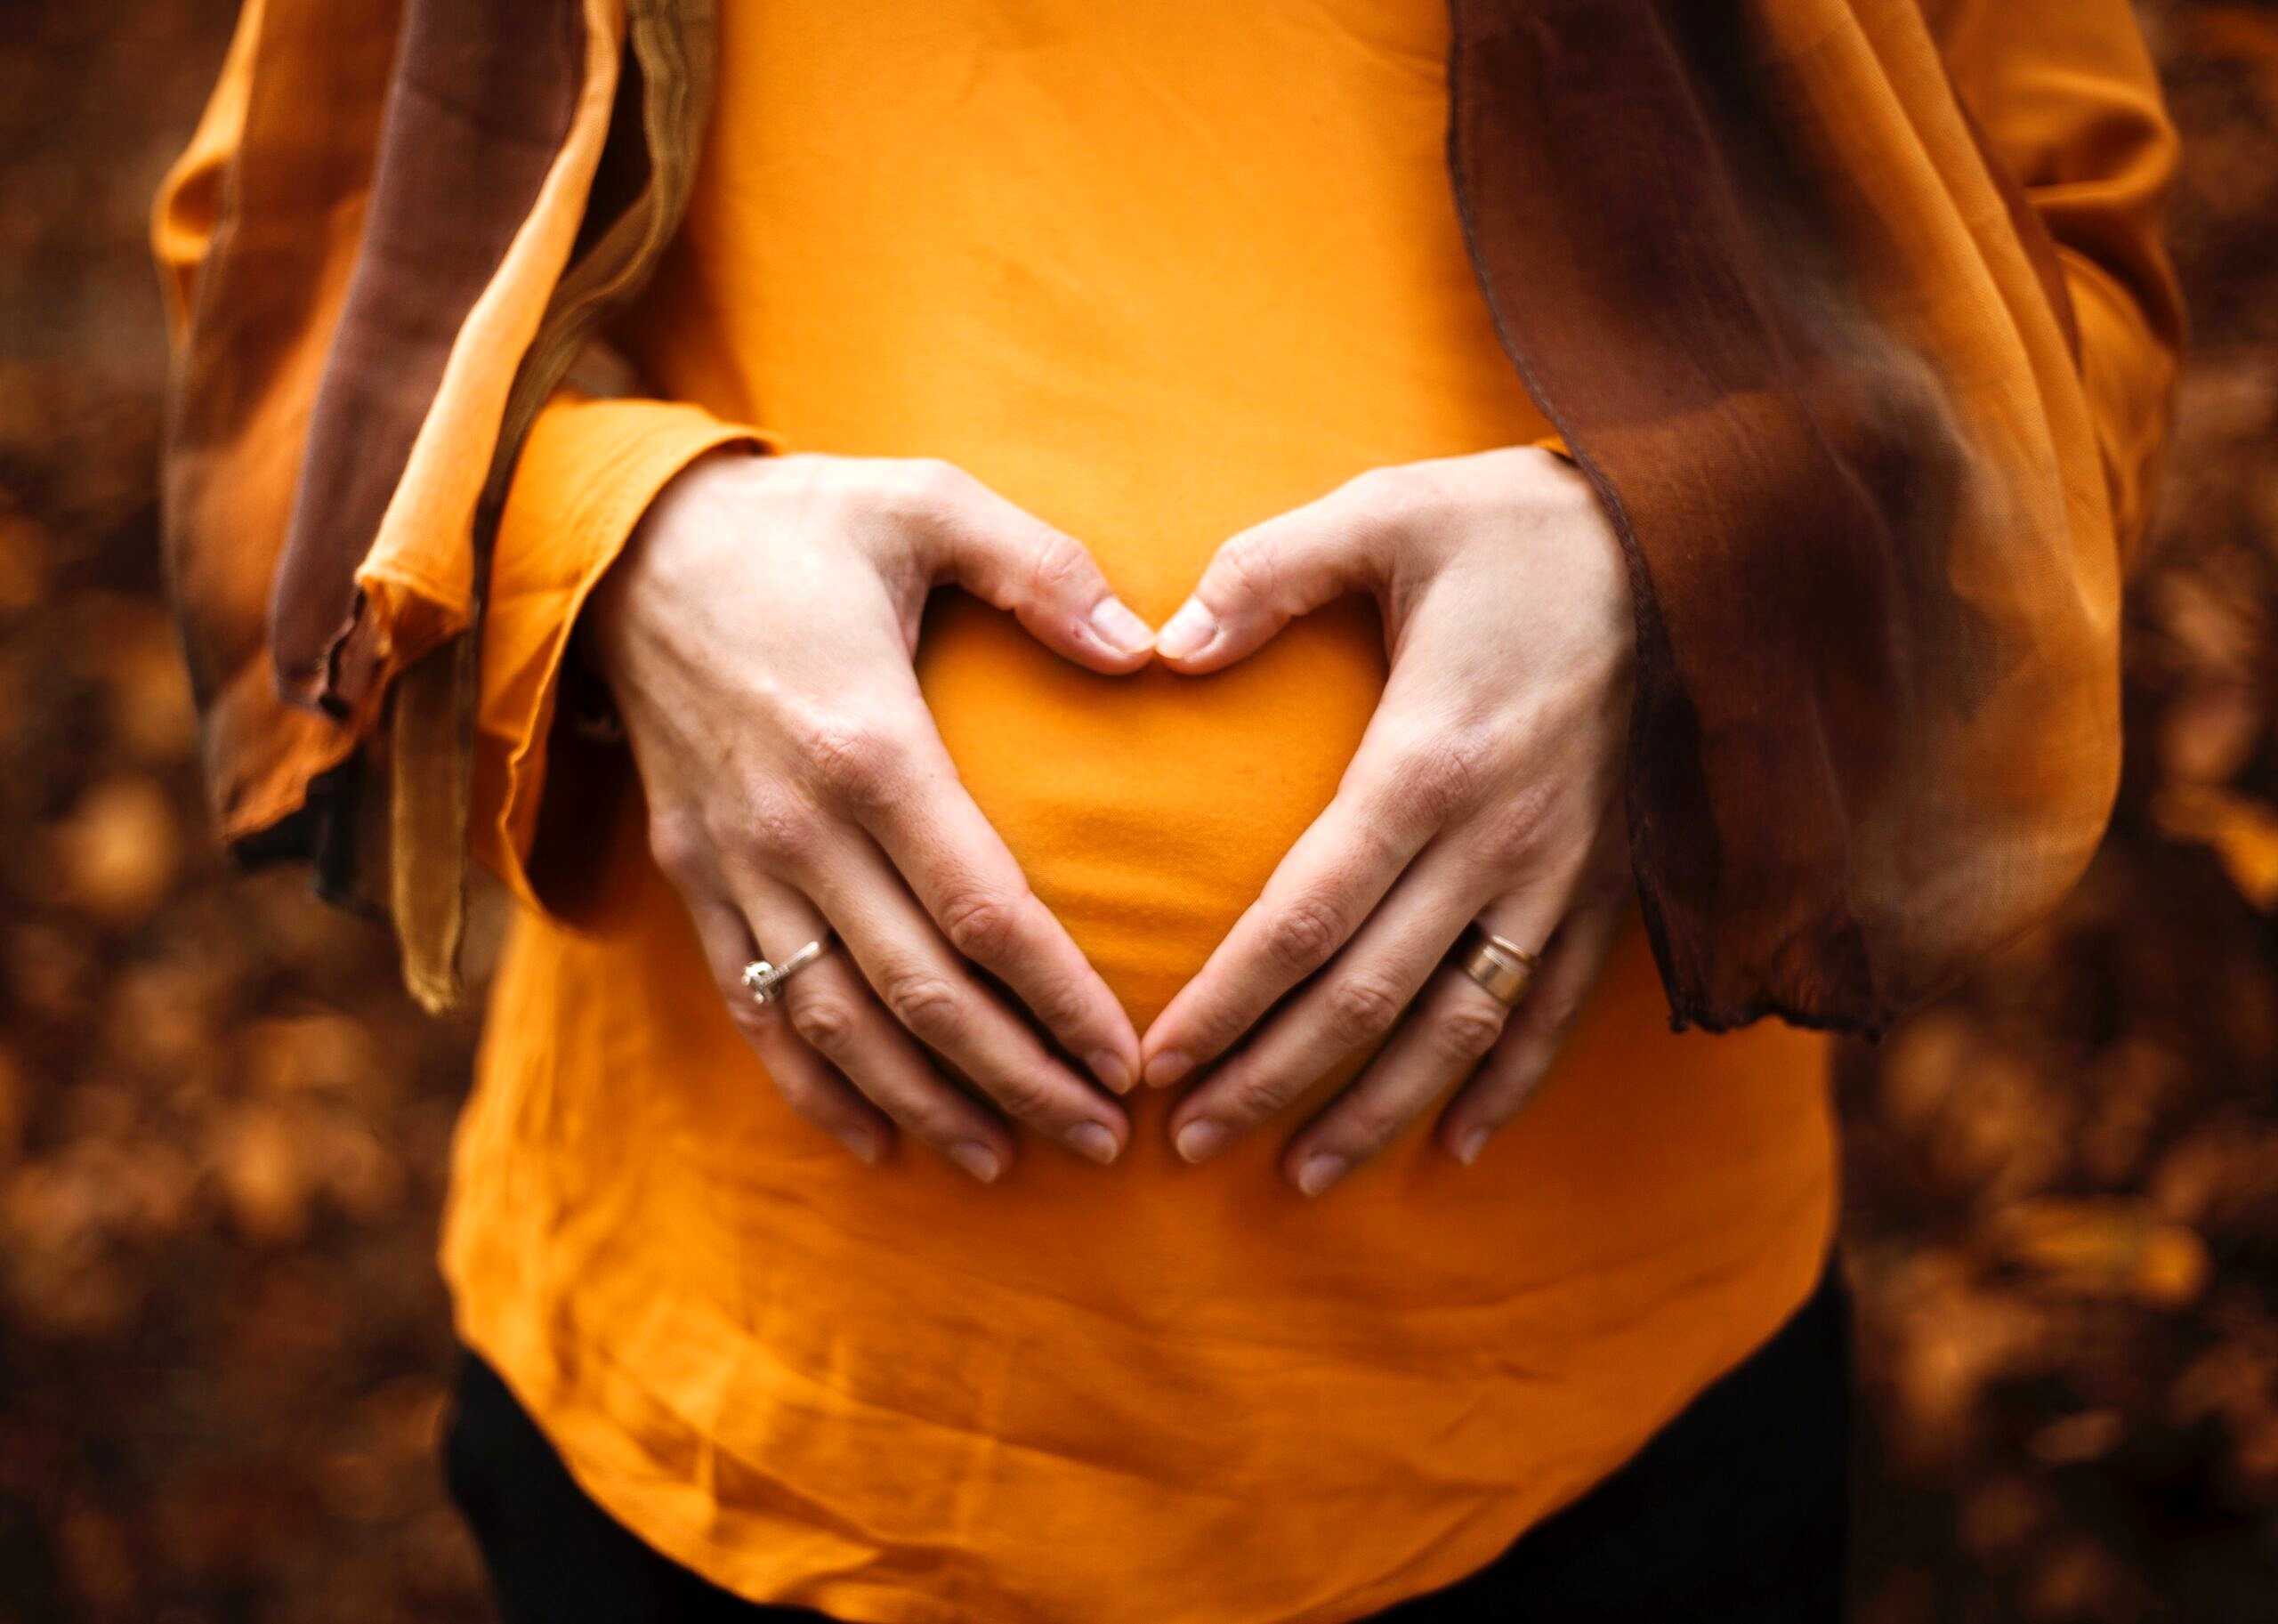 Pregnant person with their hands on their stomach.